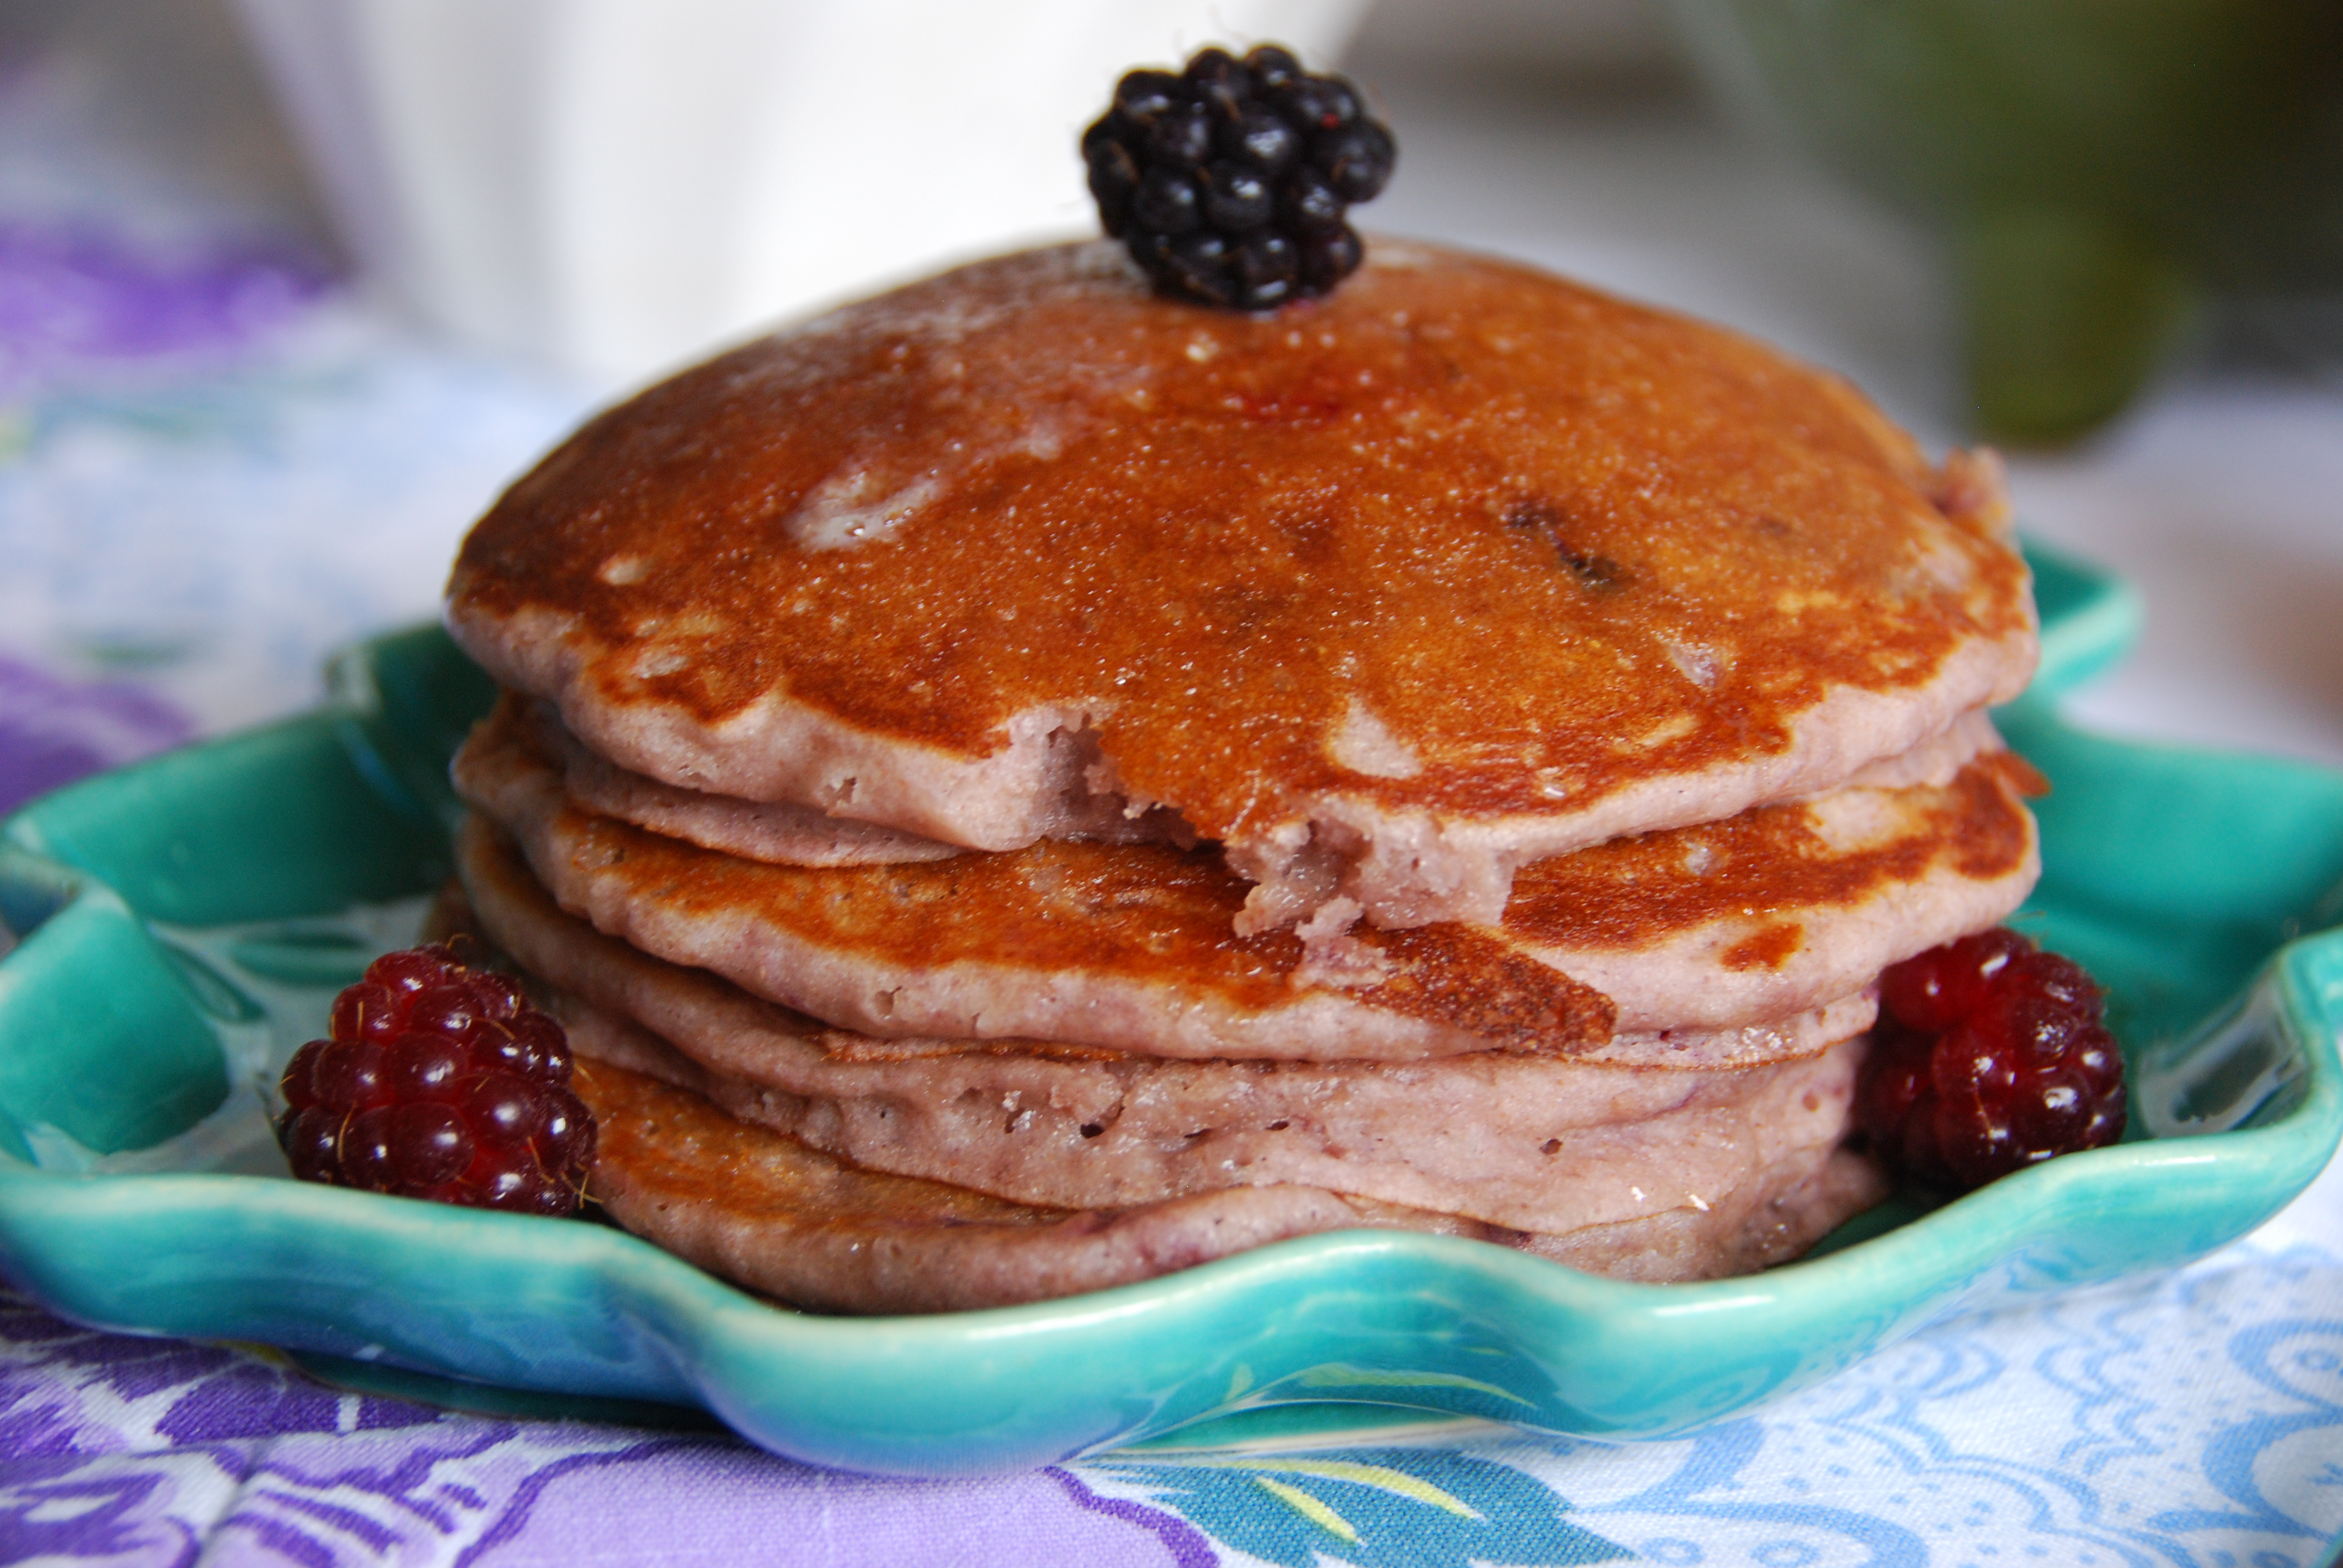 Tastes like pancakes only berry (er) and gluten free